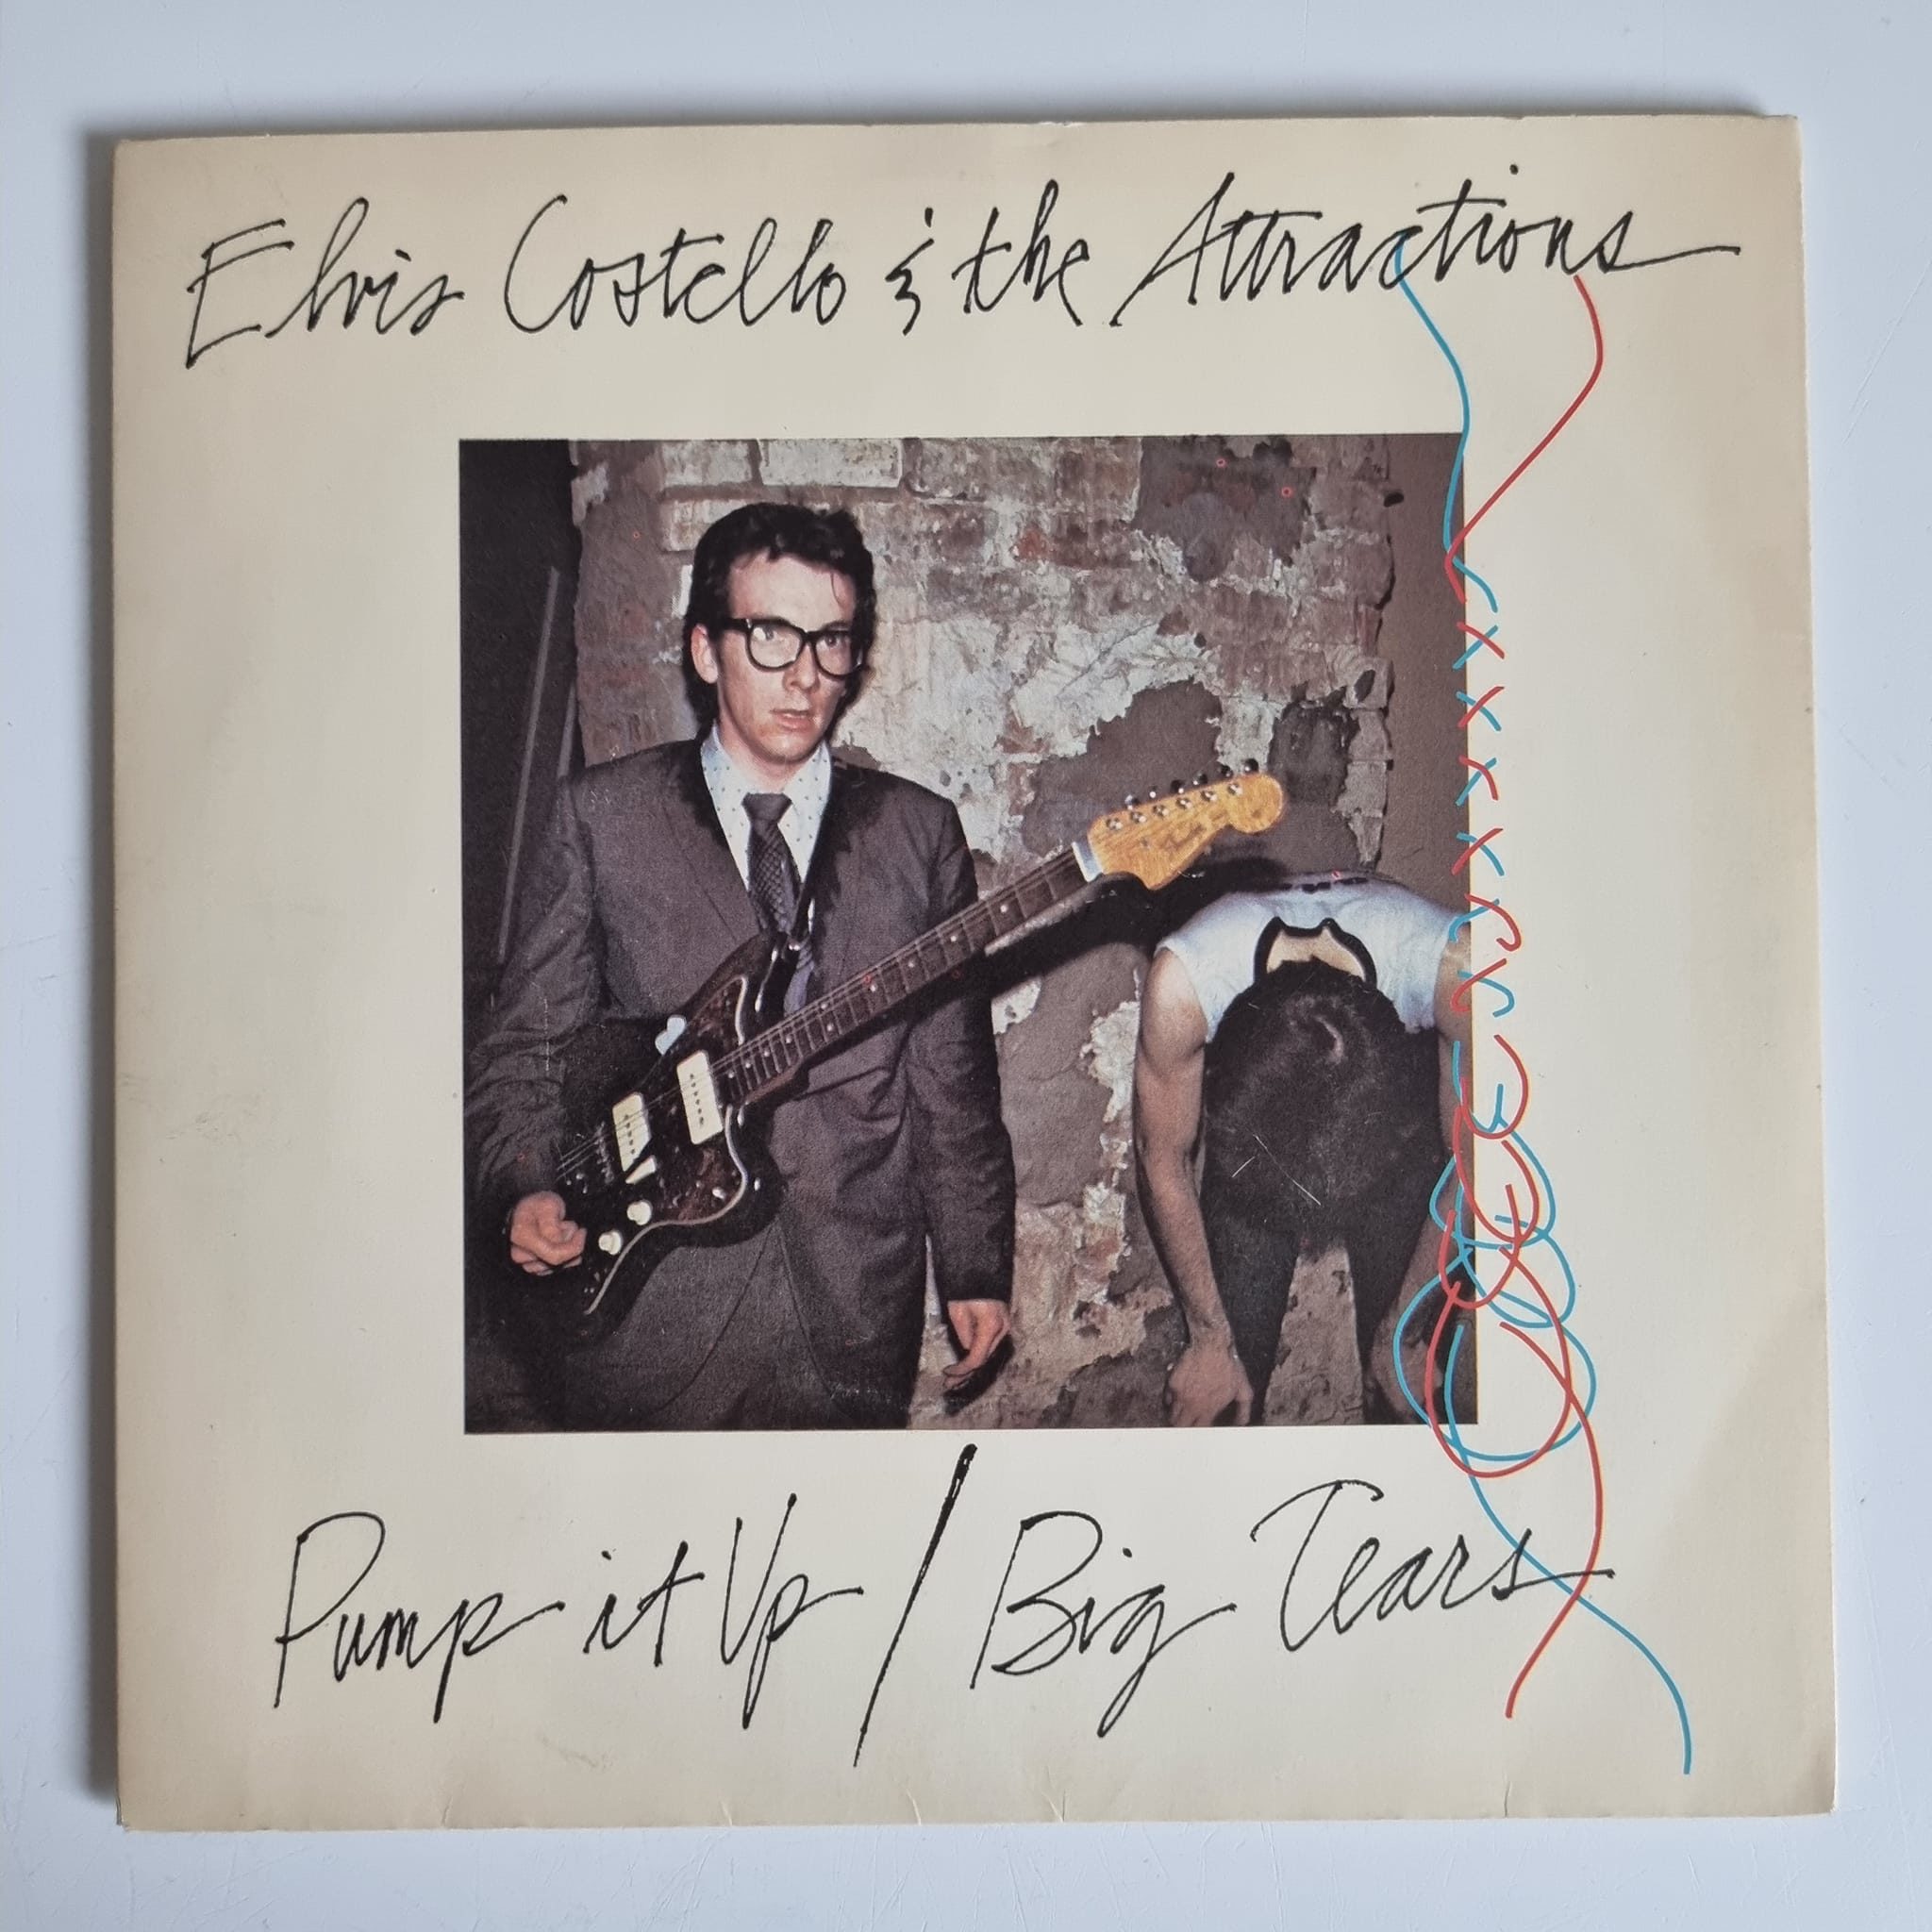 Buy this rare Elvis Costello record by clicking here